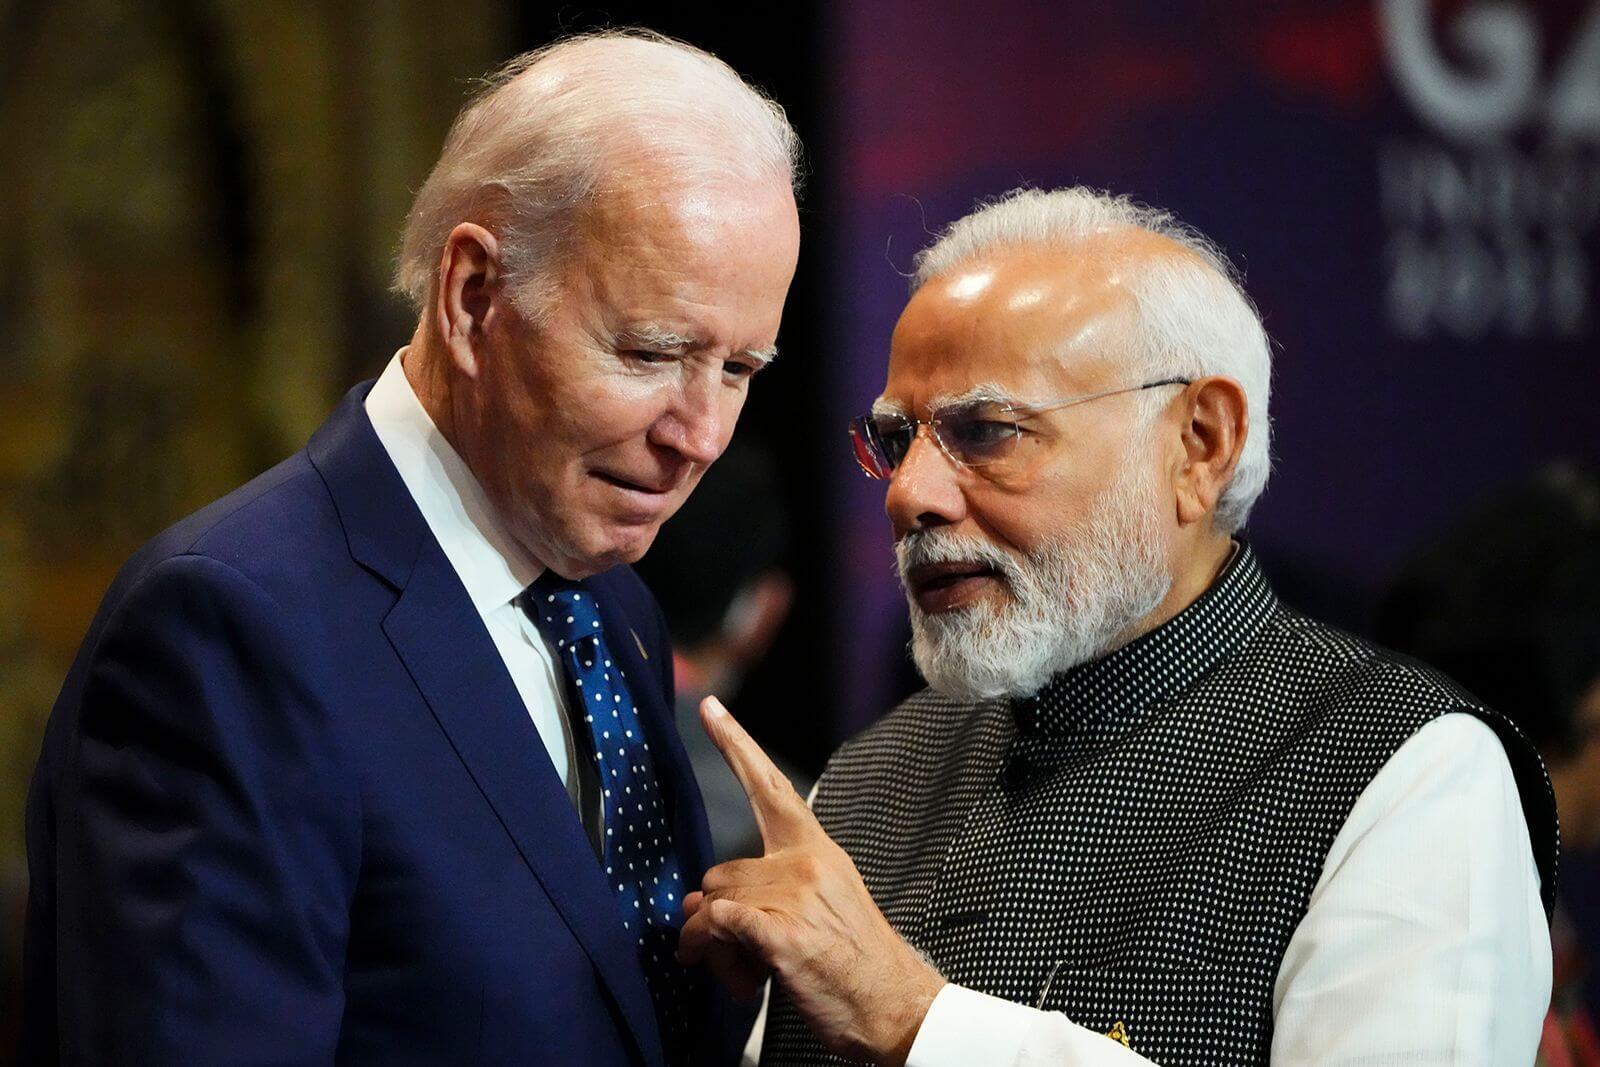 PM Modi to Answer Only Two Questions in Rare Joint Press Conference with US Pres Biden: CNN